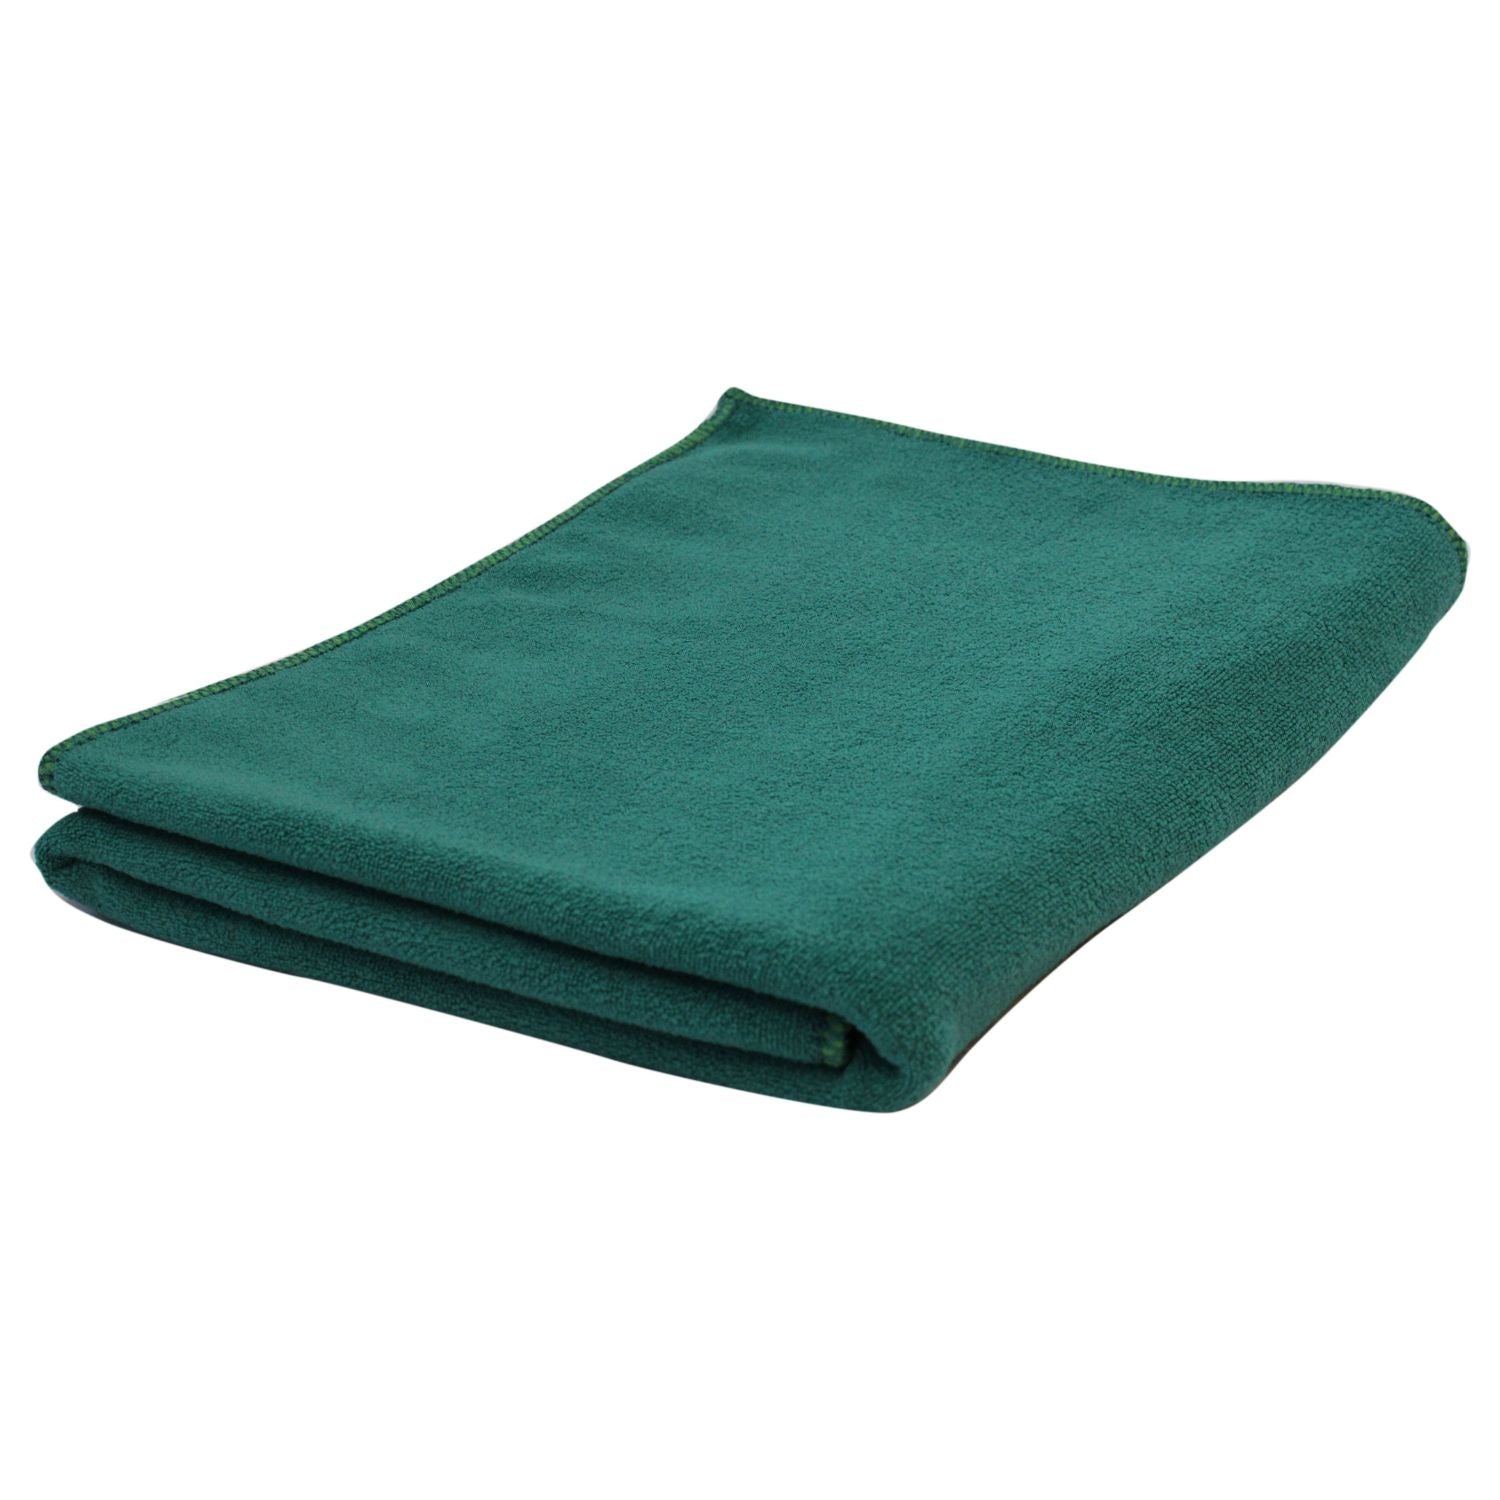 Microfibre Towel for Bath, Quick Dry Towel for Men Women, Large Size Towel, 27 x 55 Inch (70x140 Cms, Set of 1, Teal)